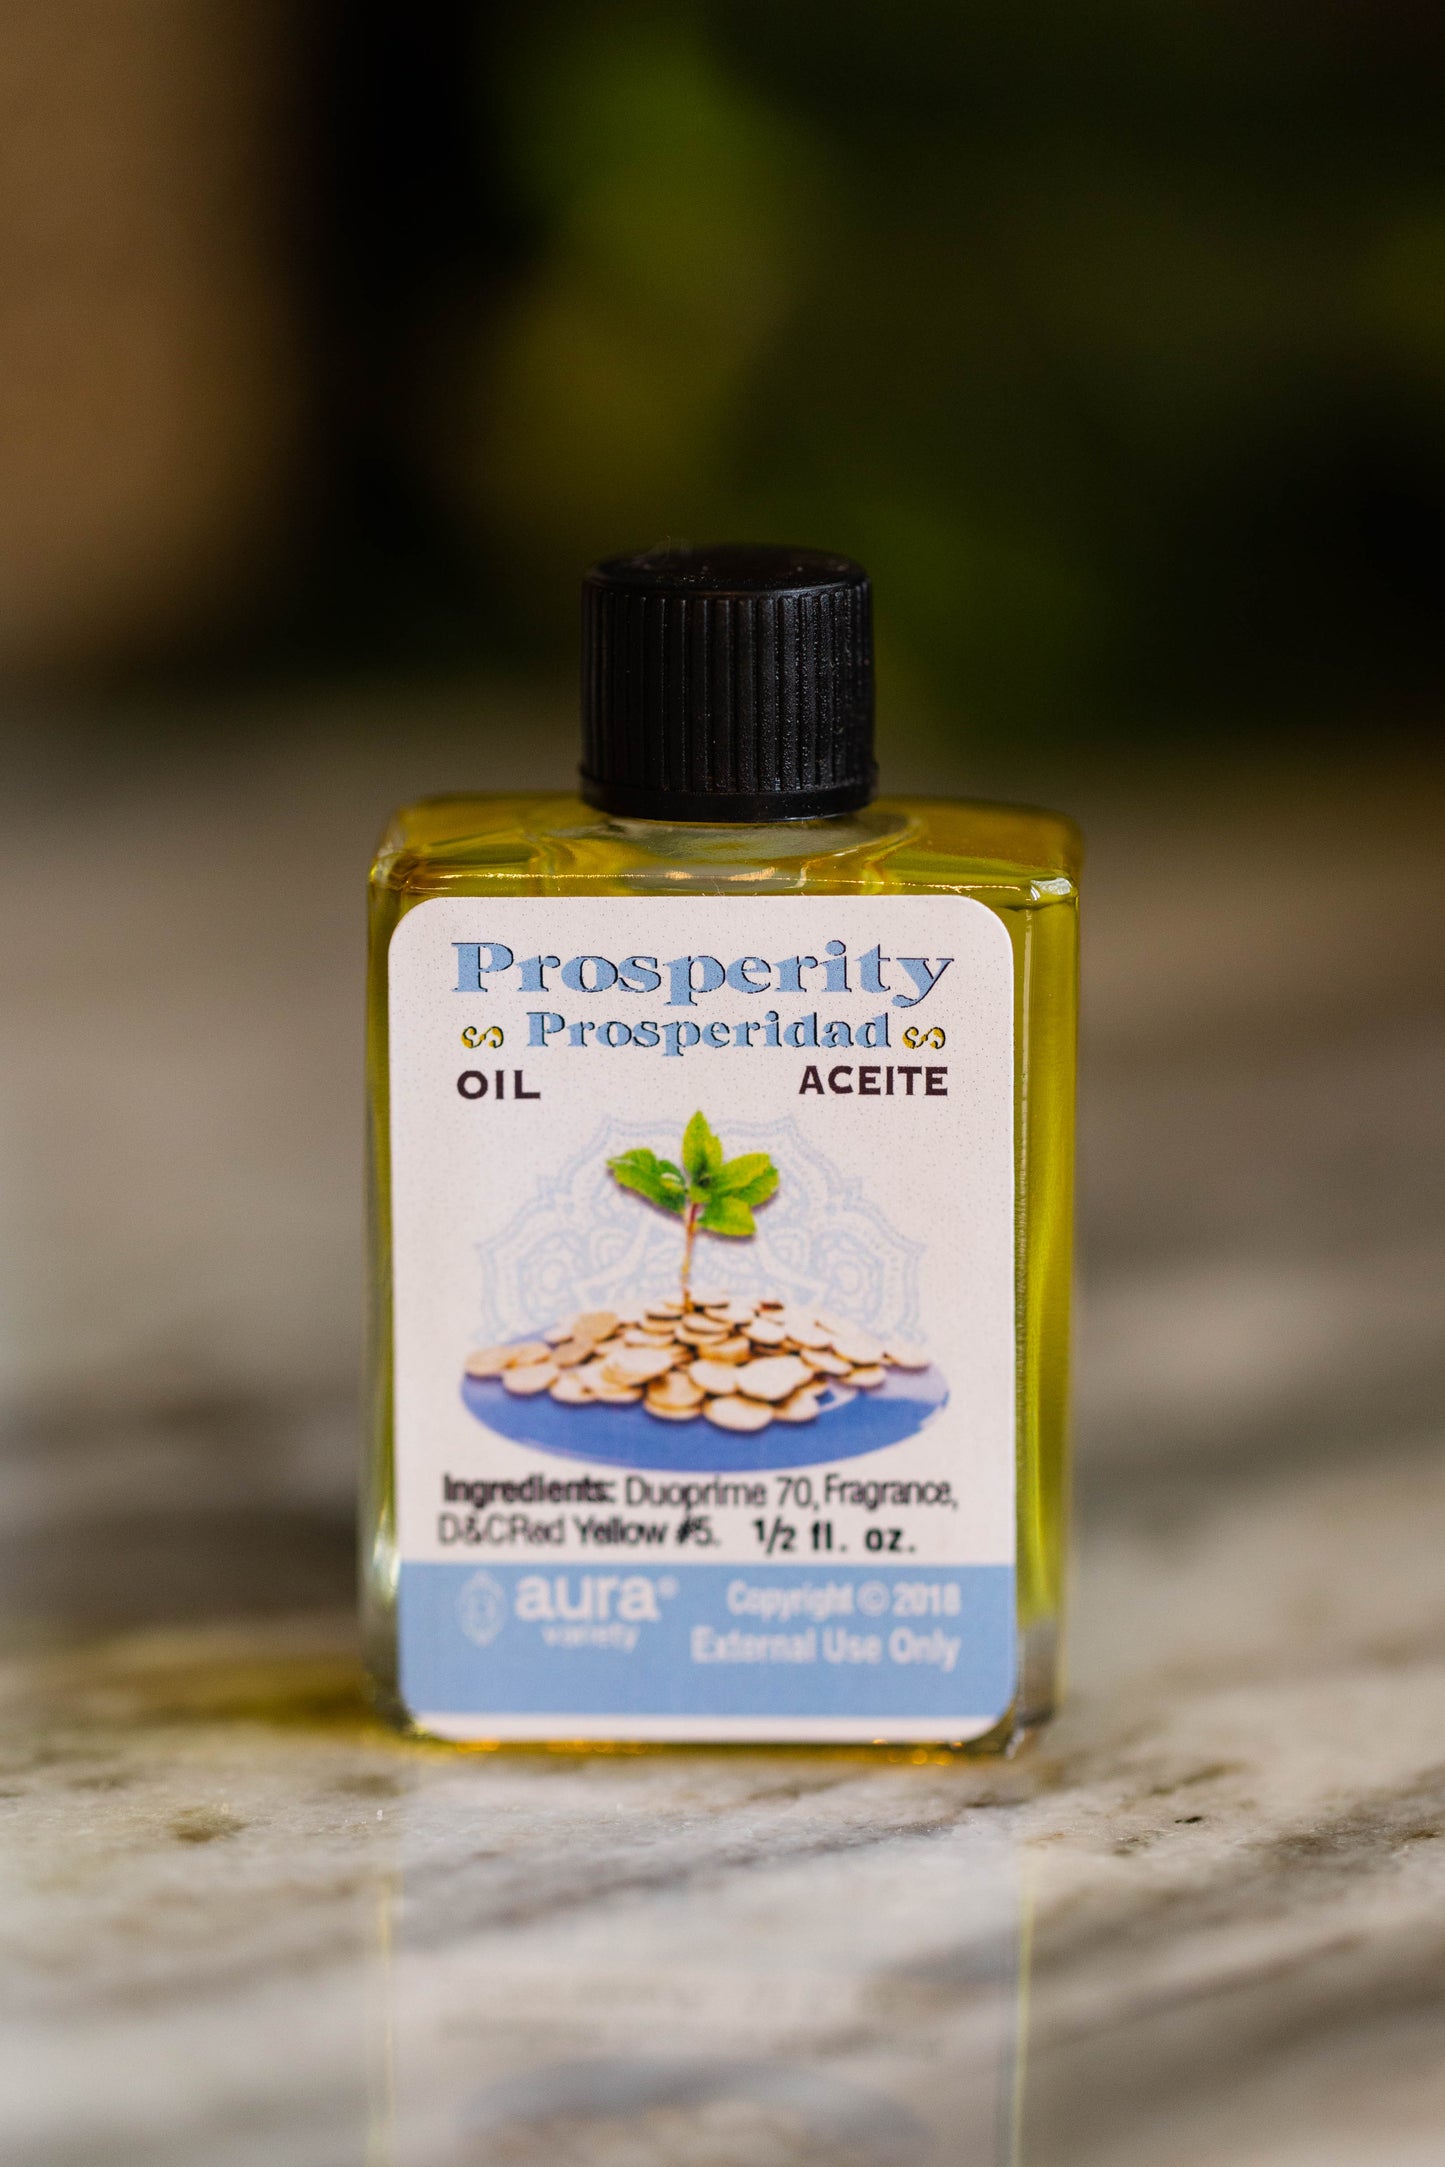 PROSPERITY Conjure Oil for drawing luck, success in business deals, gambling, or financial matters